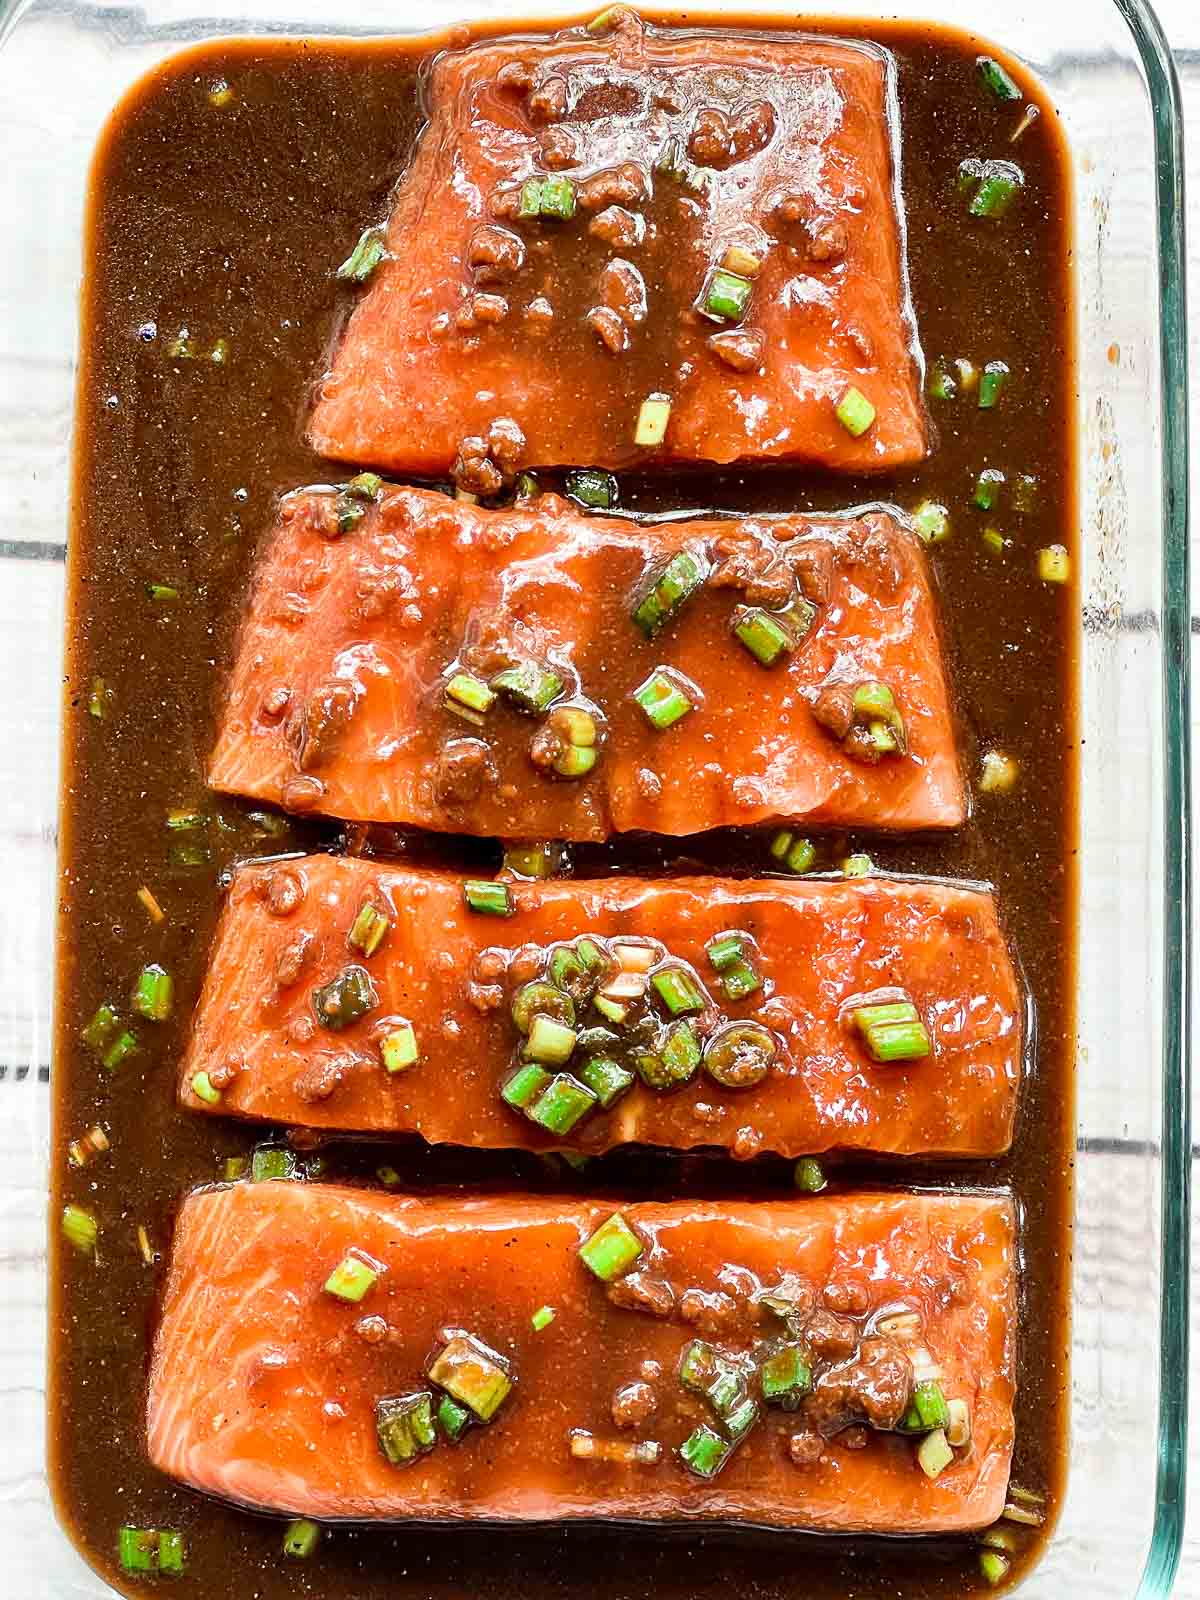 Four raw salmon filets marinating in a glass pyrex dish.